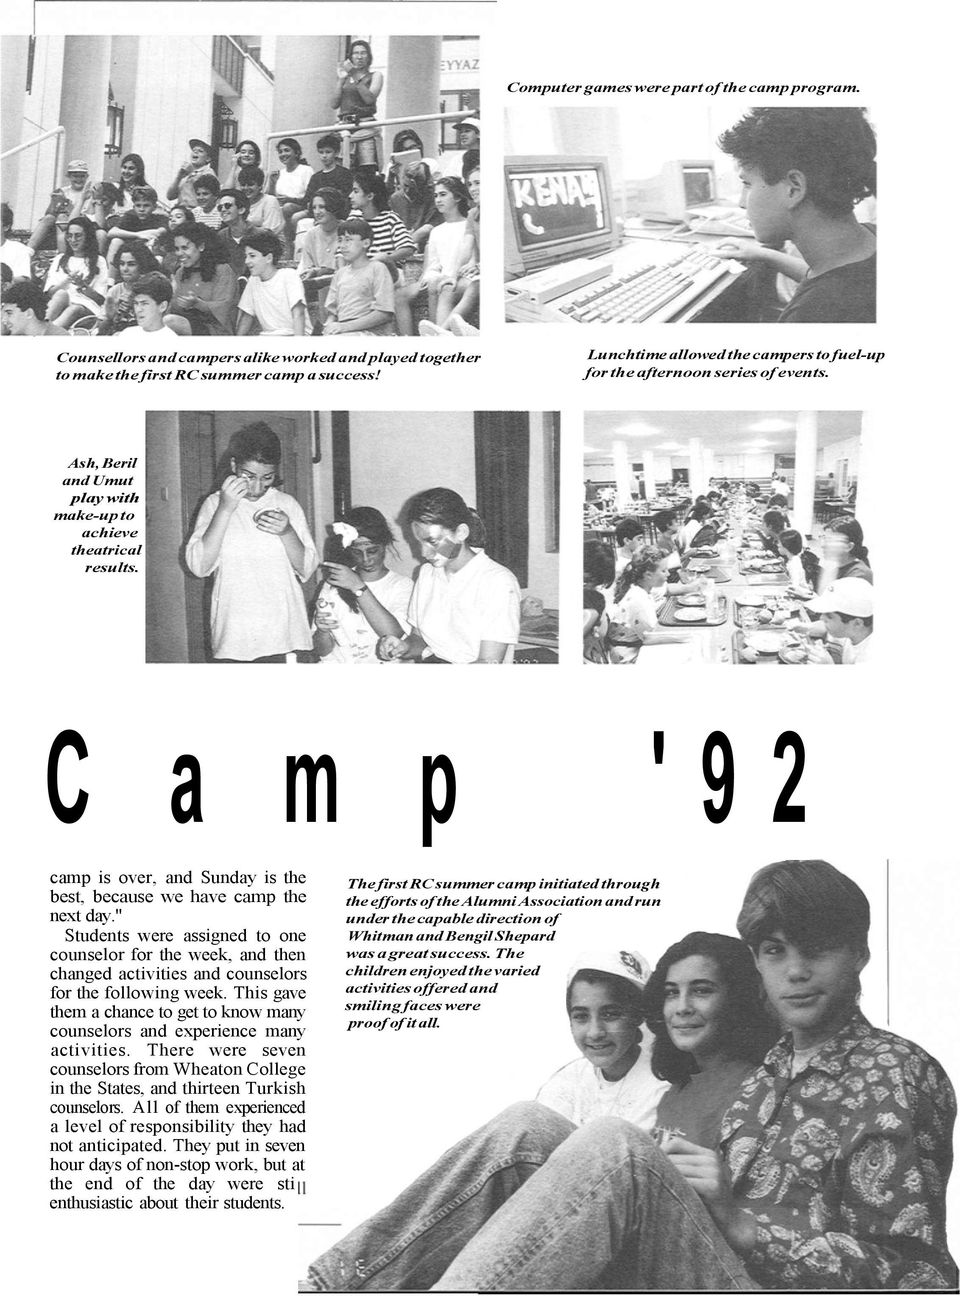 C a m p ' 9 2 camp is over, and Sunday is the best, because we have camp the next day.